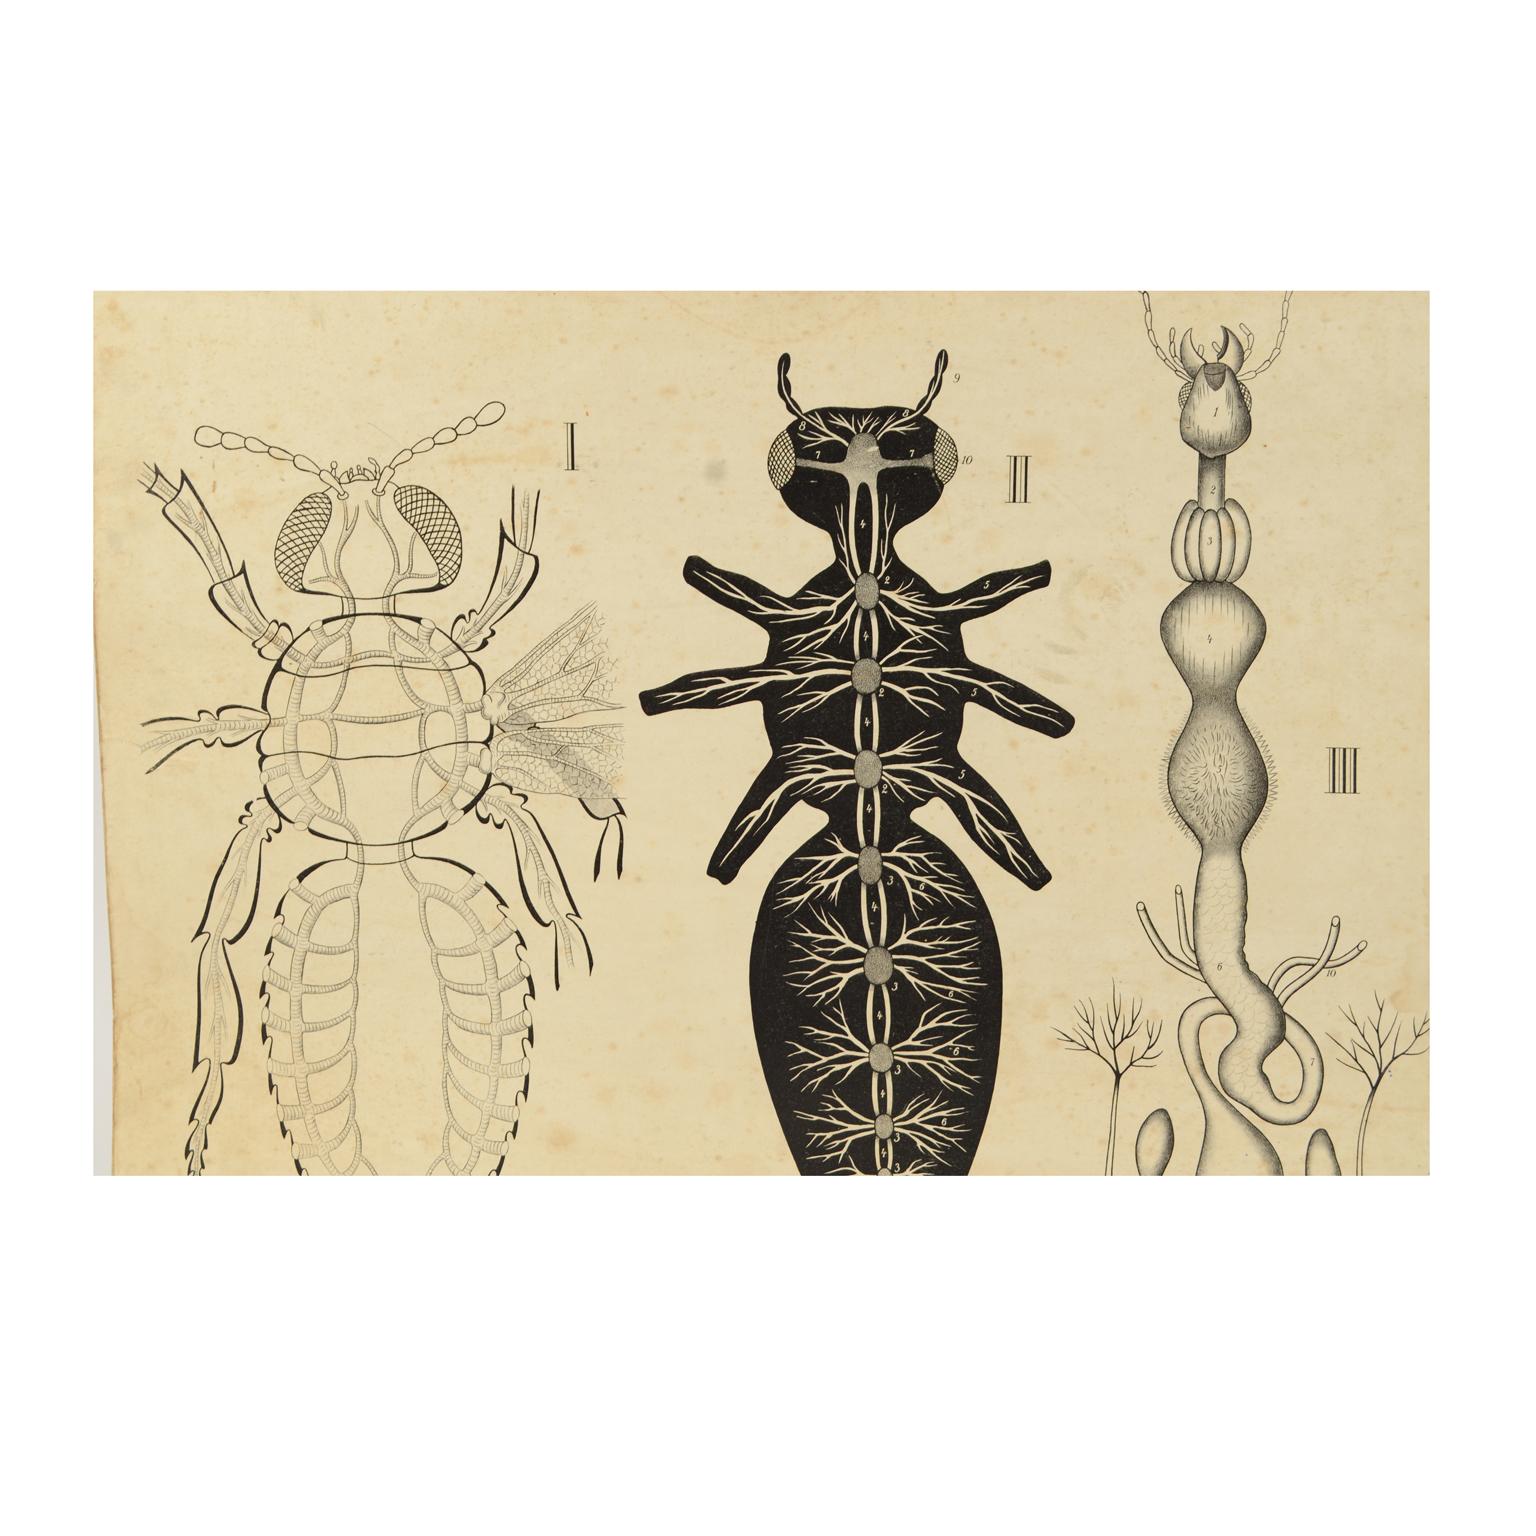 Zoological didactic plate n. 64 lithograph on cardboard made in 1925 depicting an enlarged cockroach with the digestive and reproductive system. Dybdhals Zoologiske Plancher P.M.Bye & Co Oslo. Made by H Aschehoug & Co. Good condition. Measures: 77 x